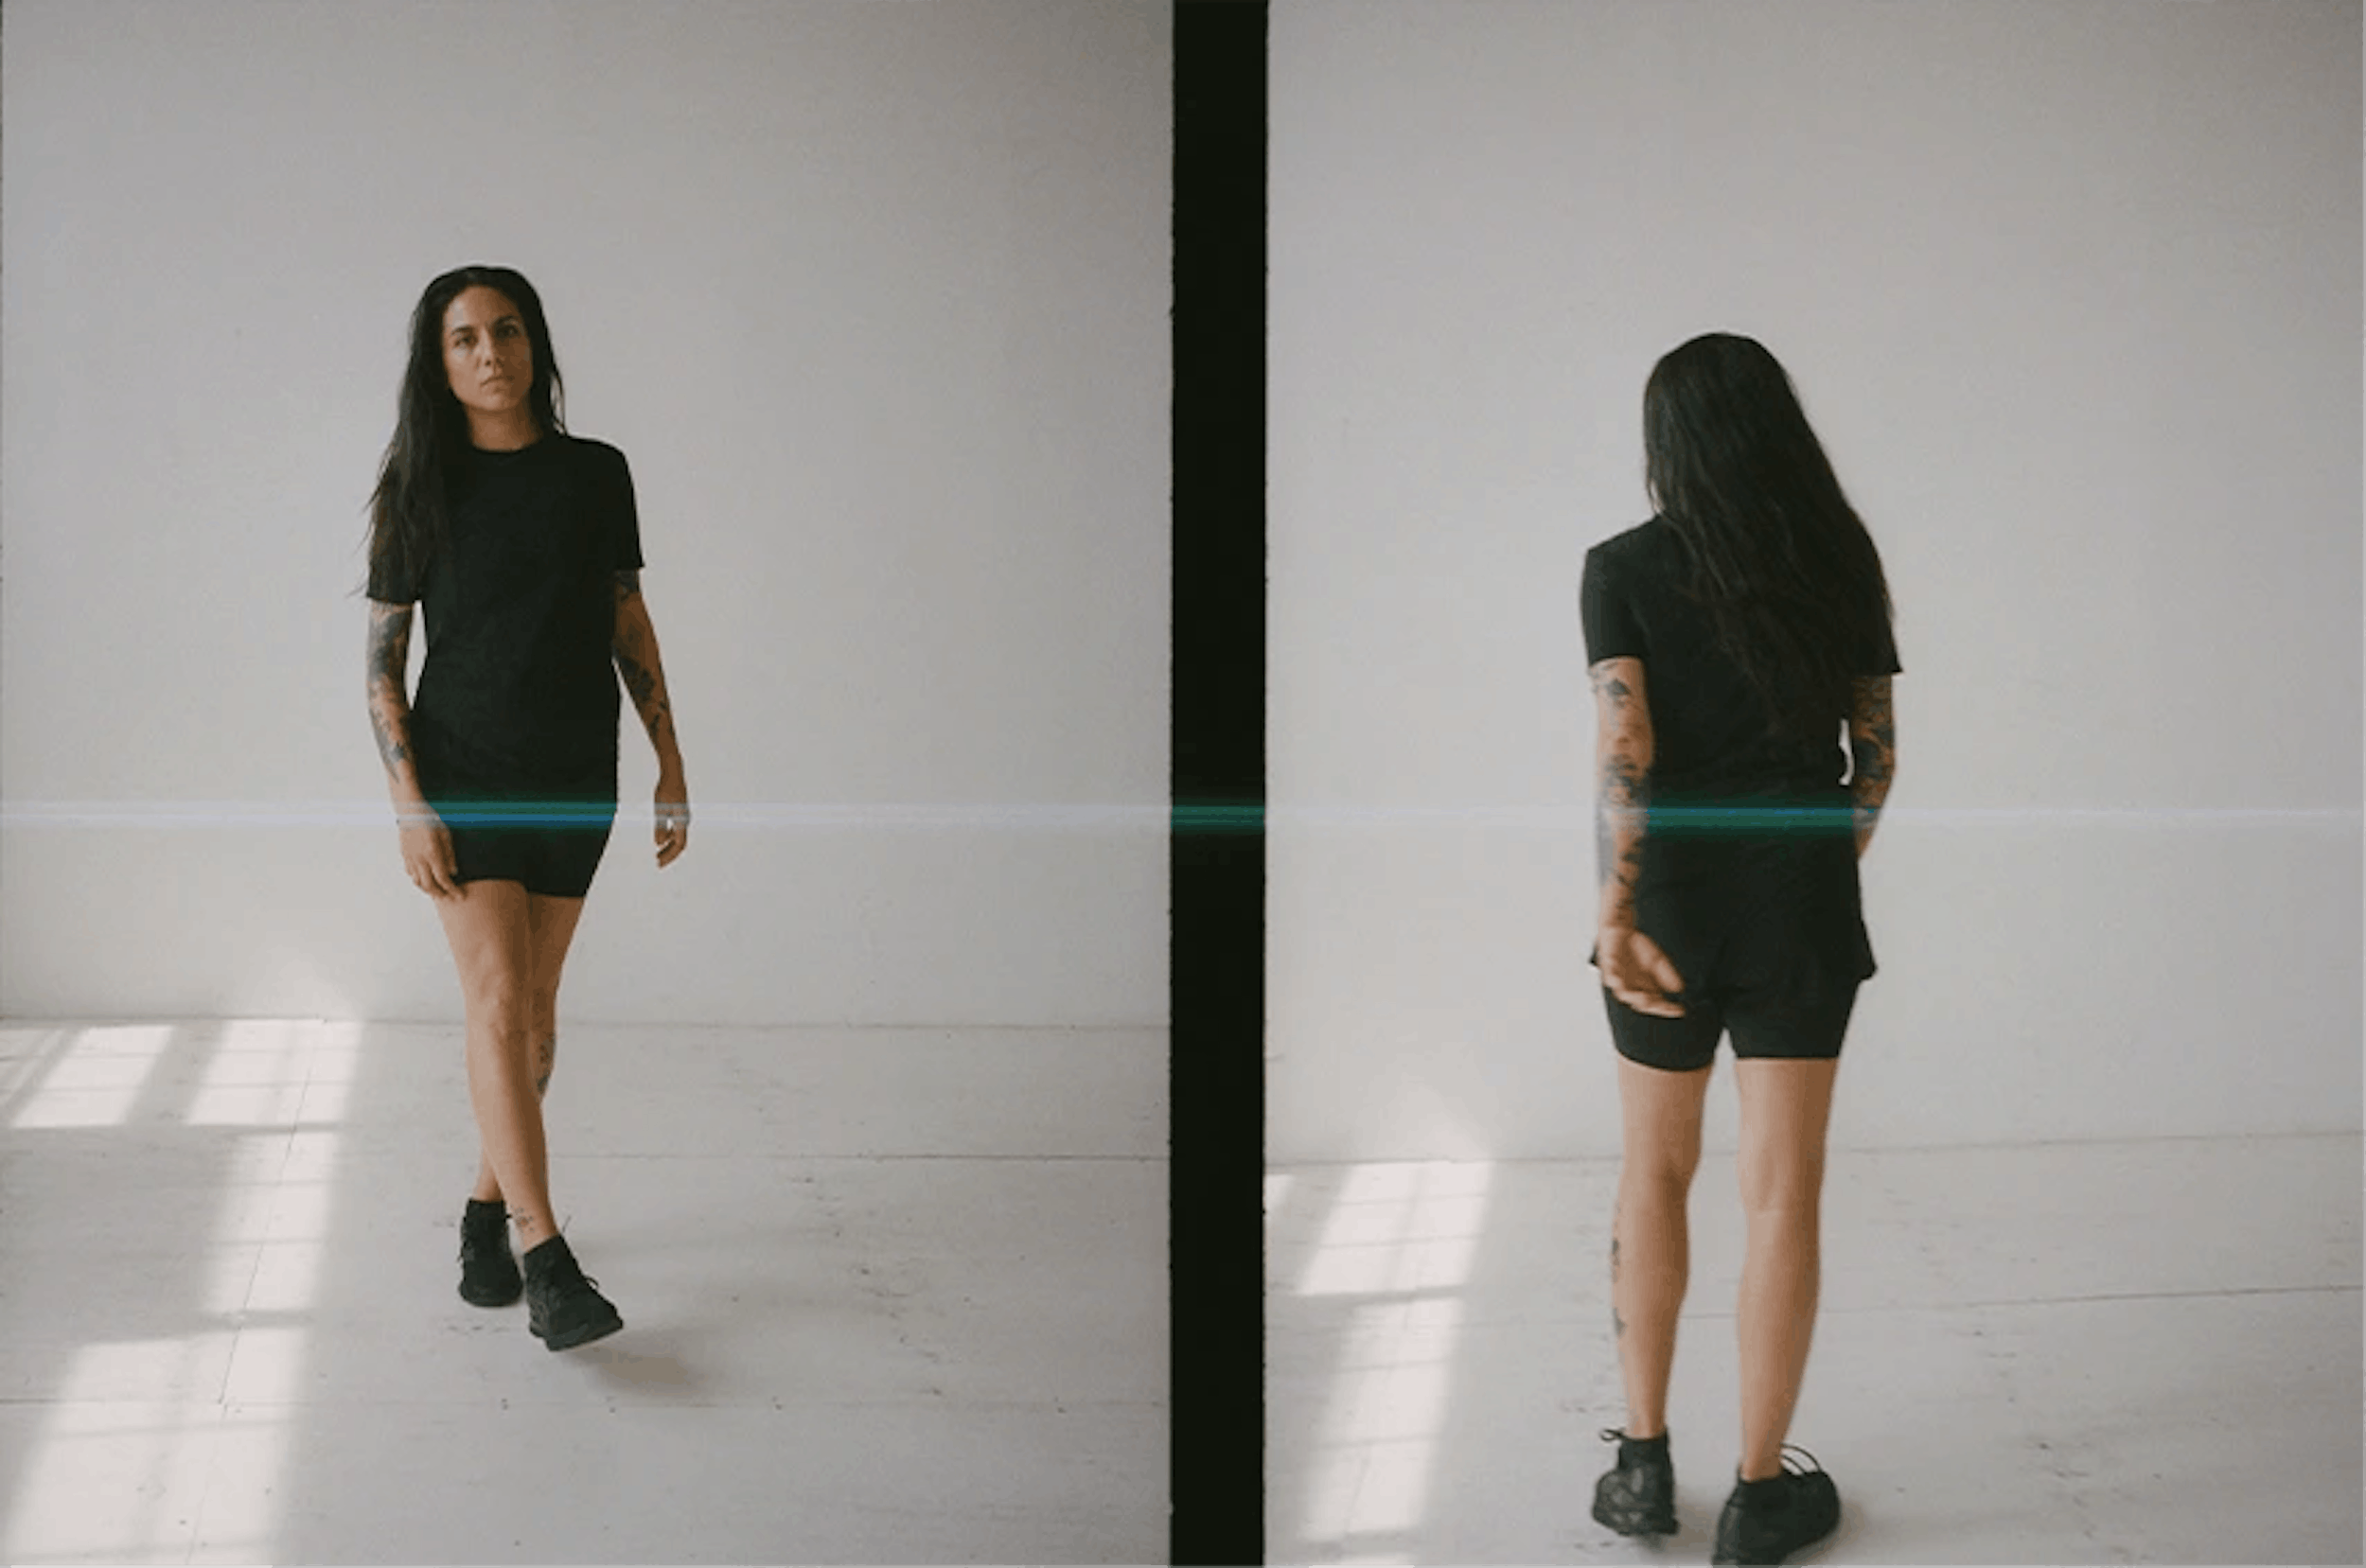 SÃO PAULO-BASED DJ & Producer Amanda Mussi interviewed by Running Order while wearing the Nao Tee & Adasi 4” Shorts